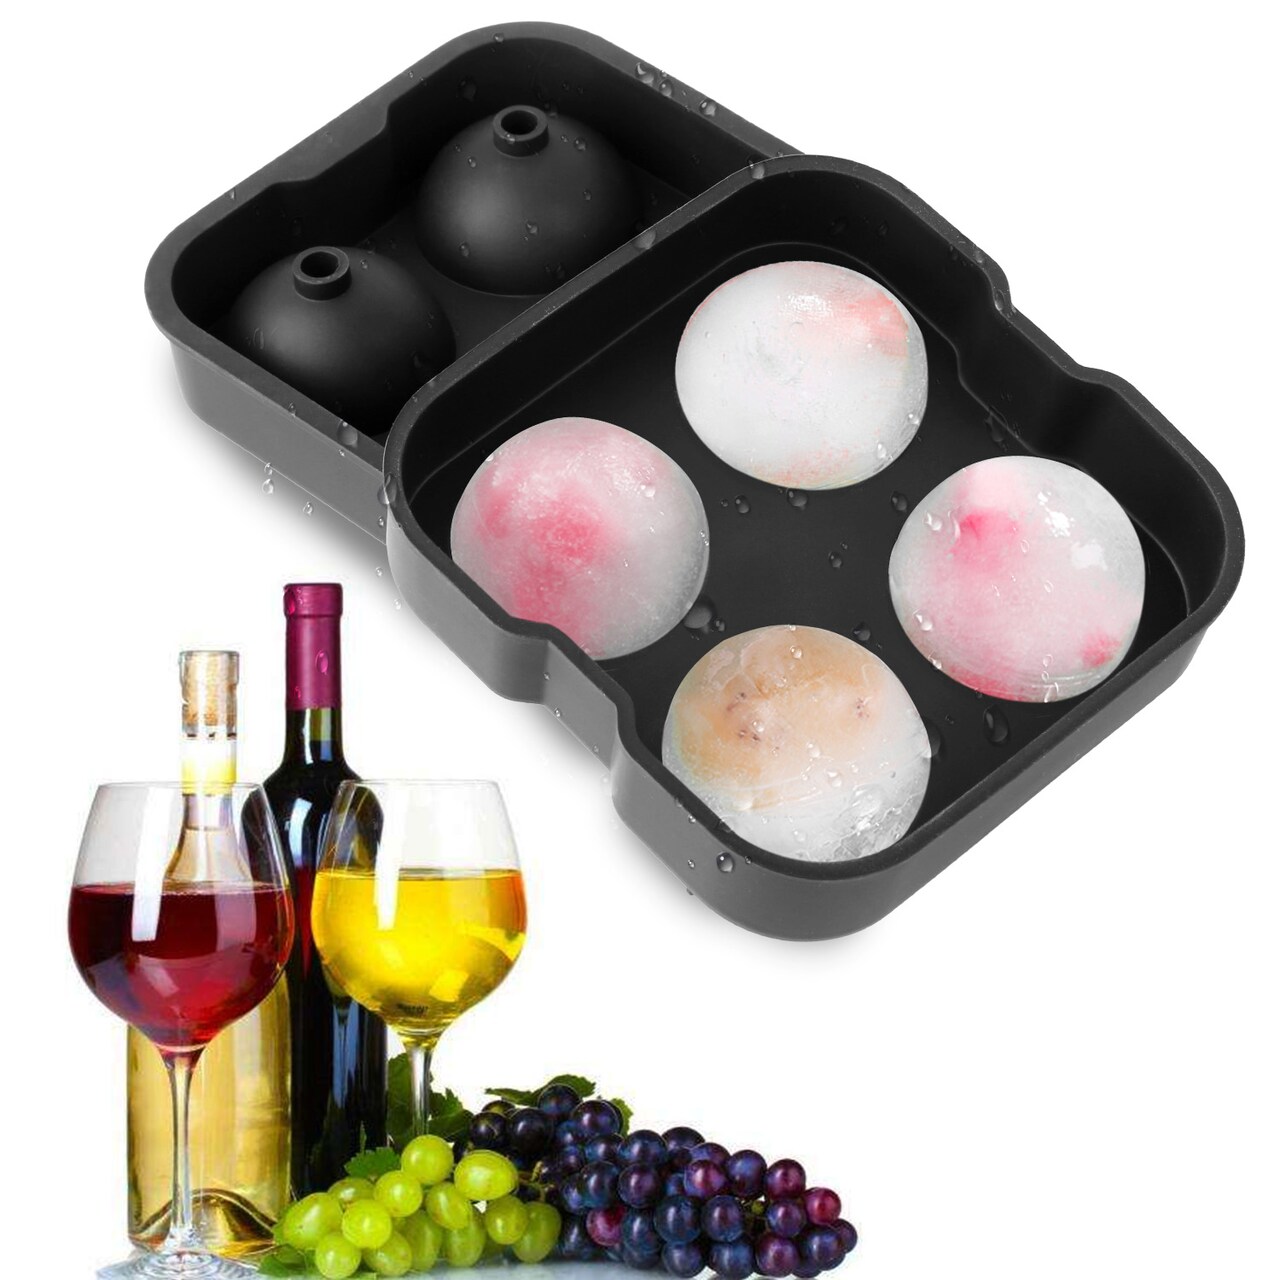 Eggracks By Global Phoenix 4-Ball Silicone Ice Mold for Whisky